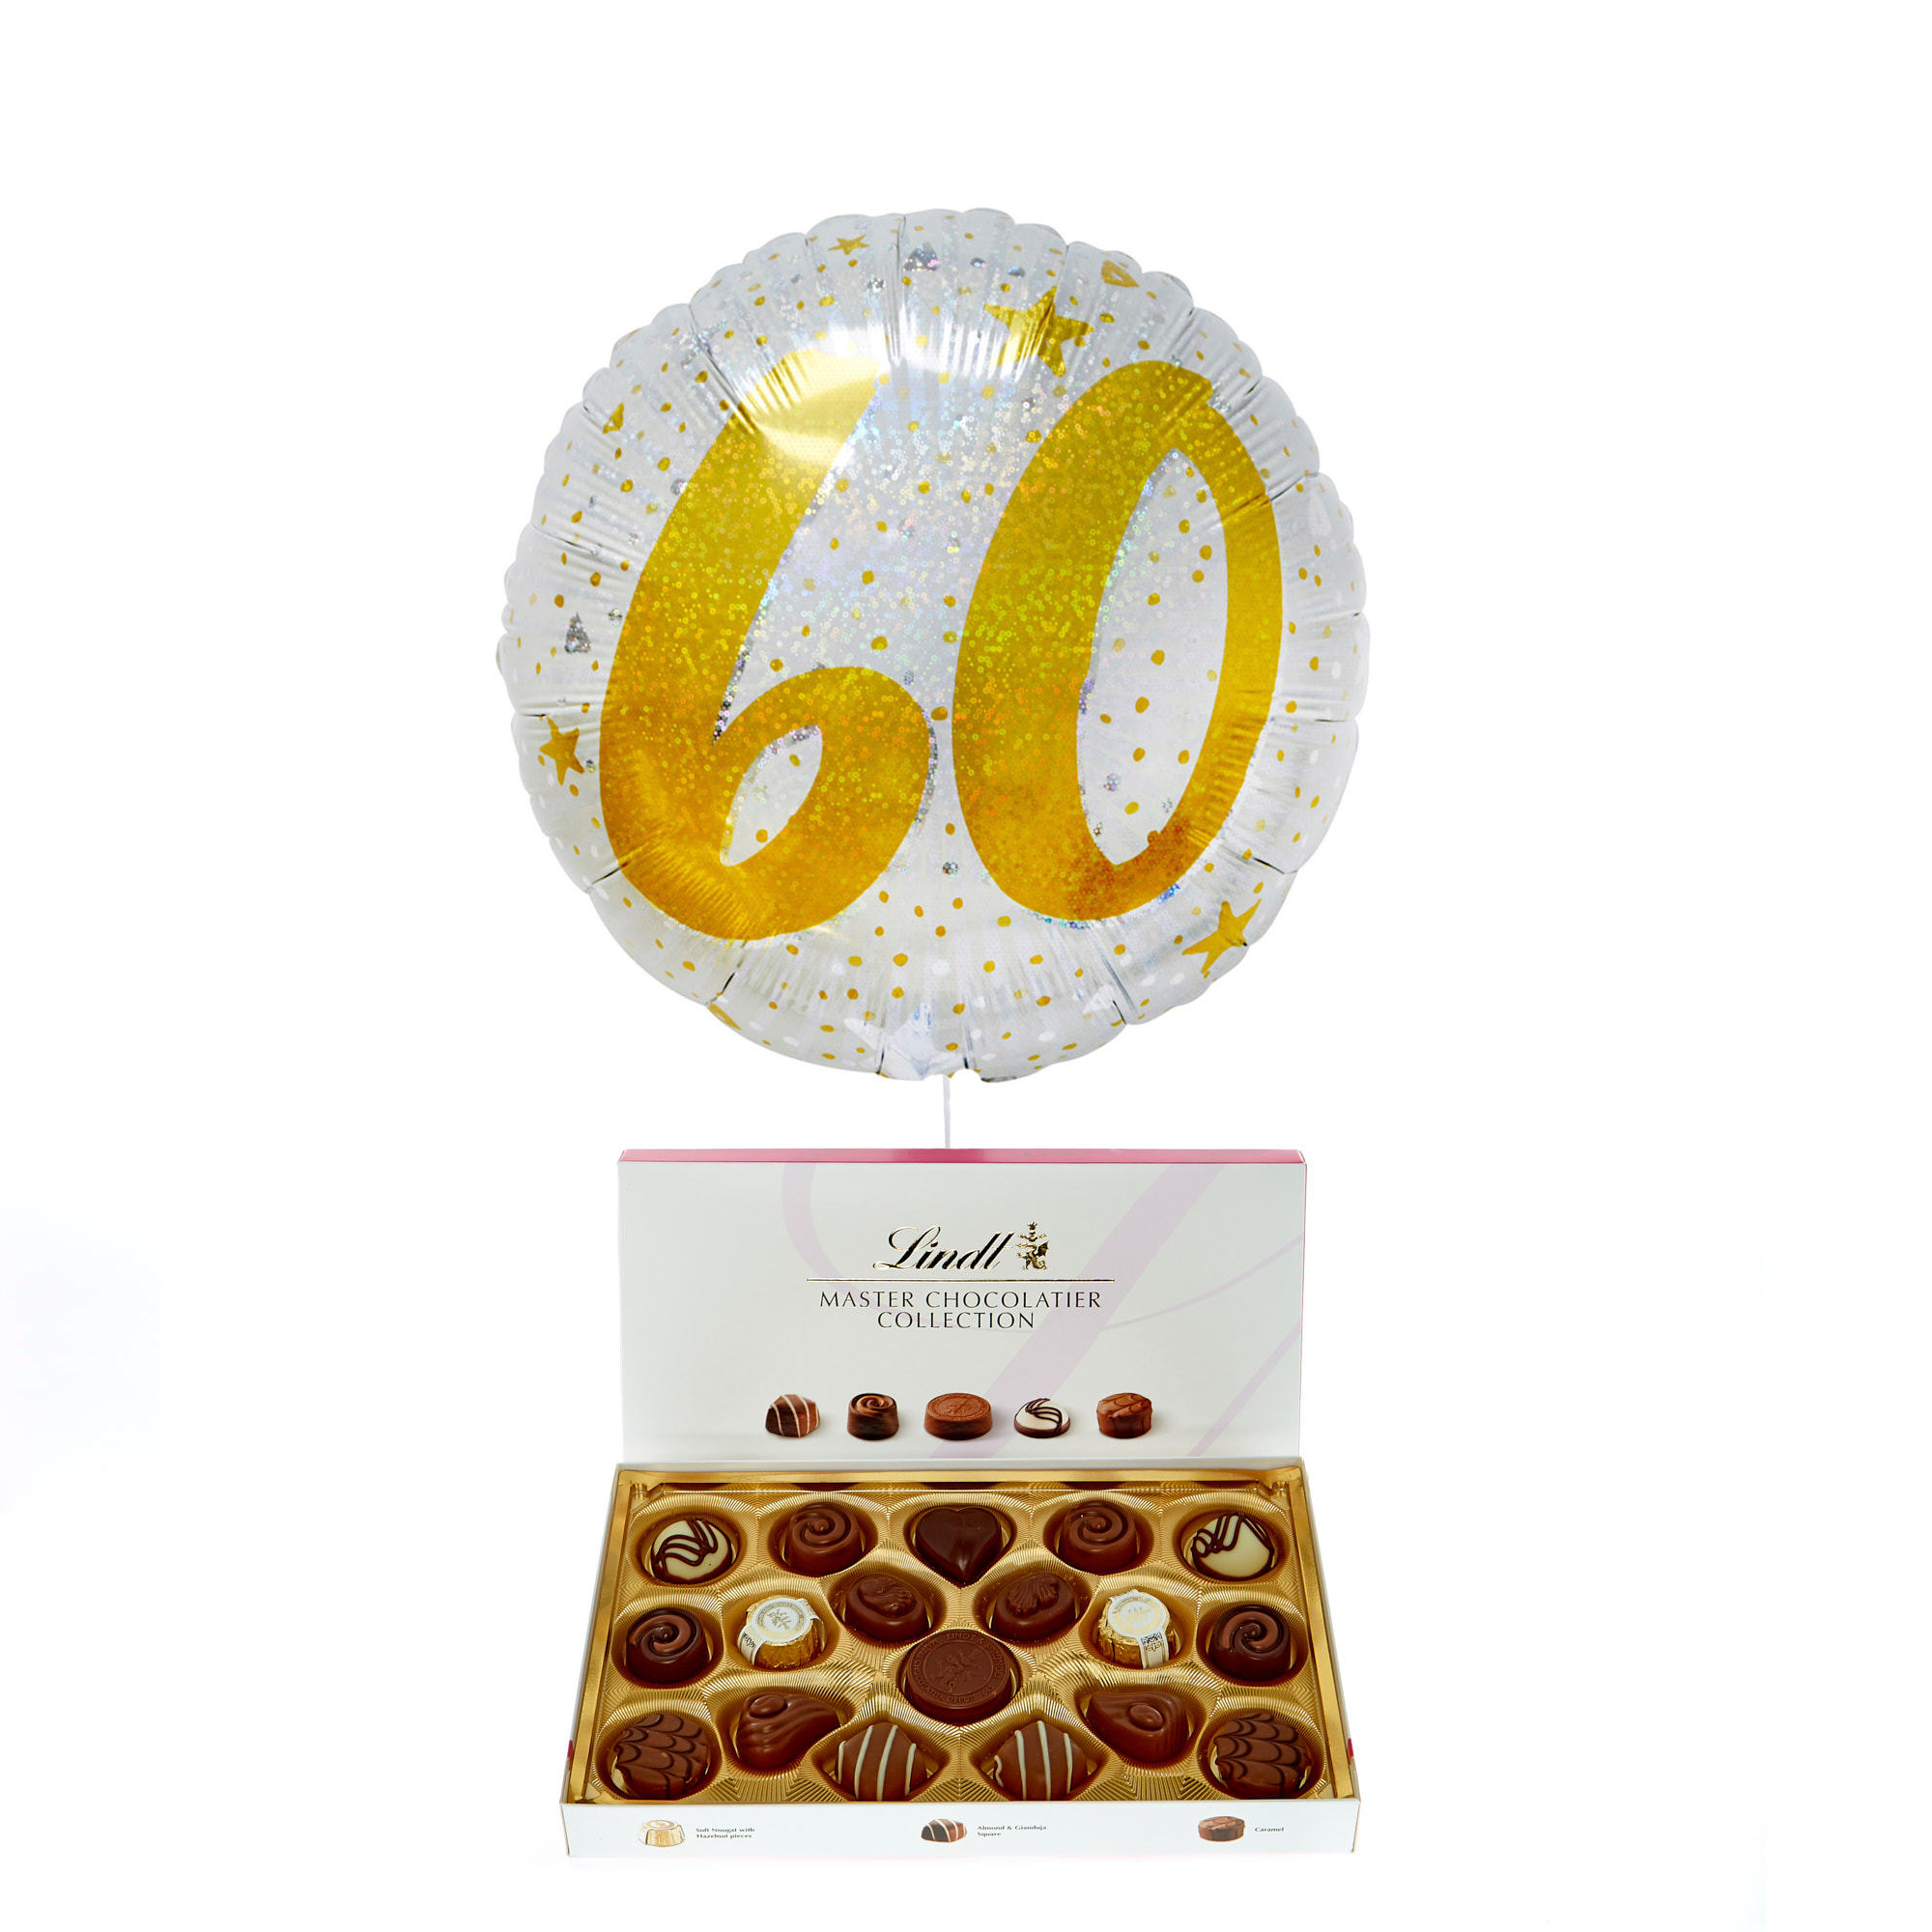 Gold & Silver 60th Birthday Balloon & Lindt Chocolates - FREE GIFT CARD!